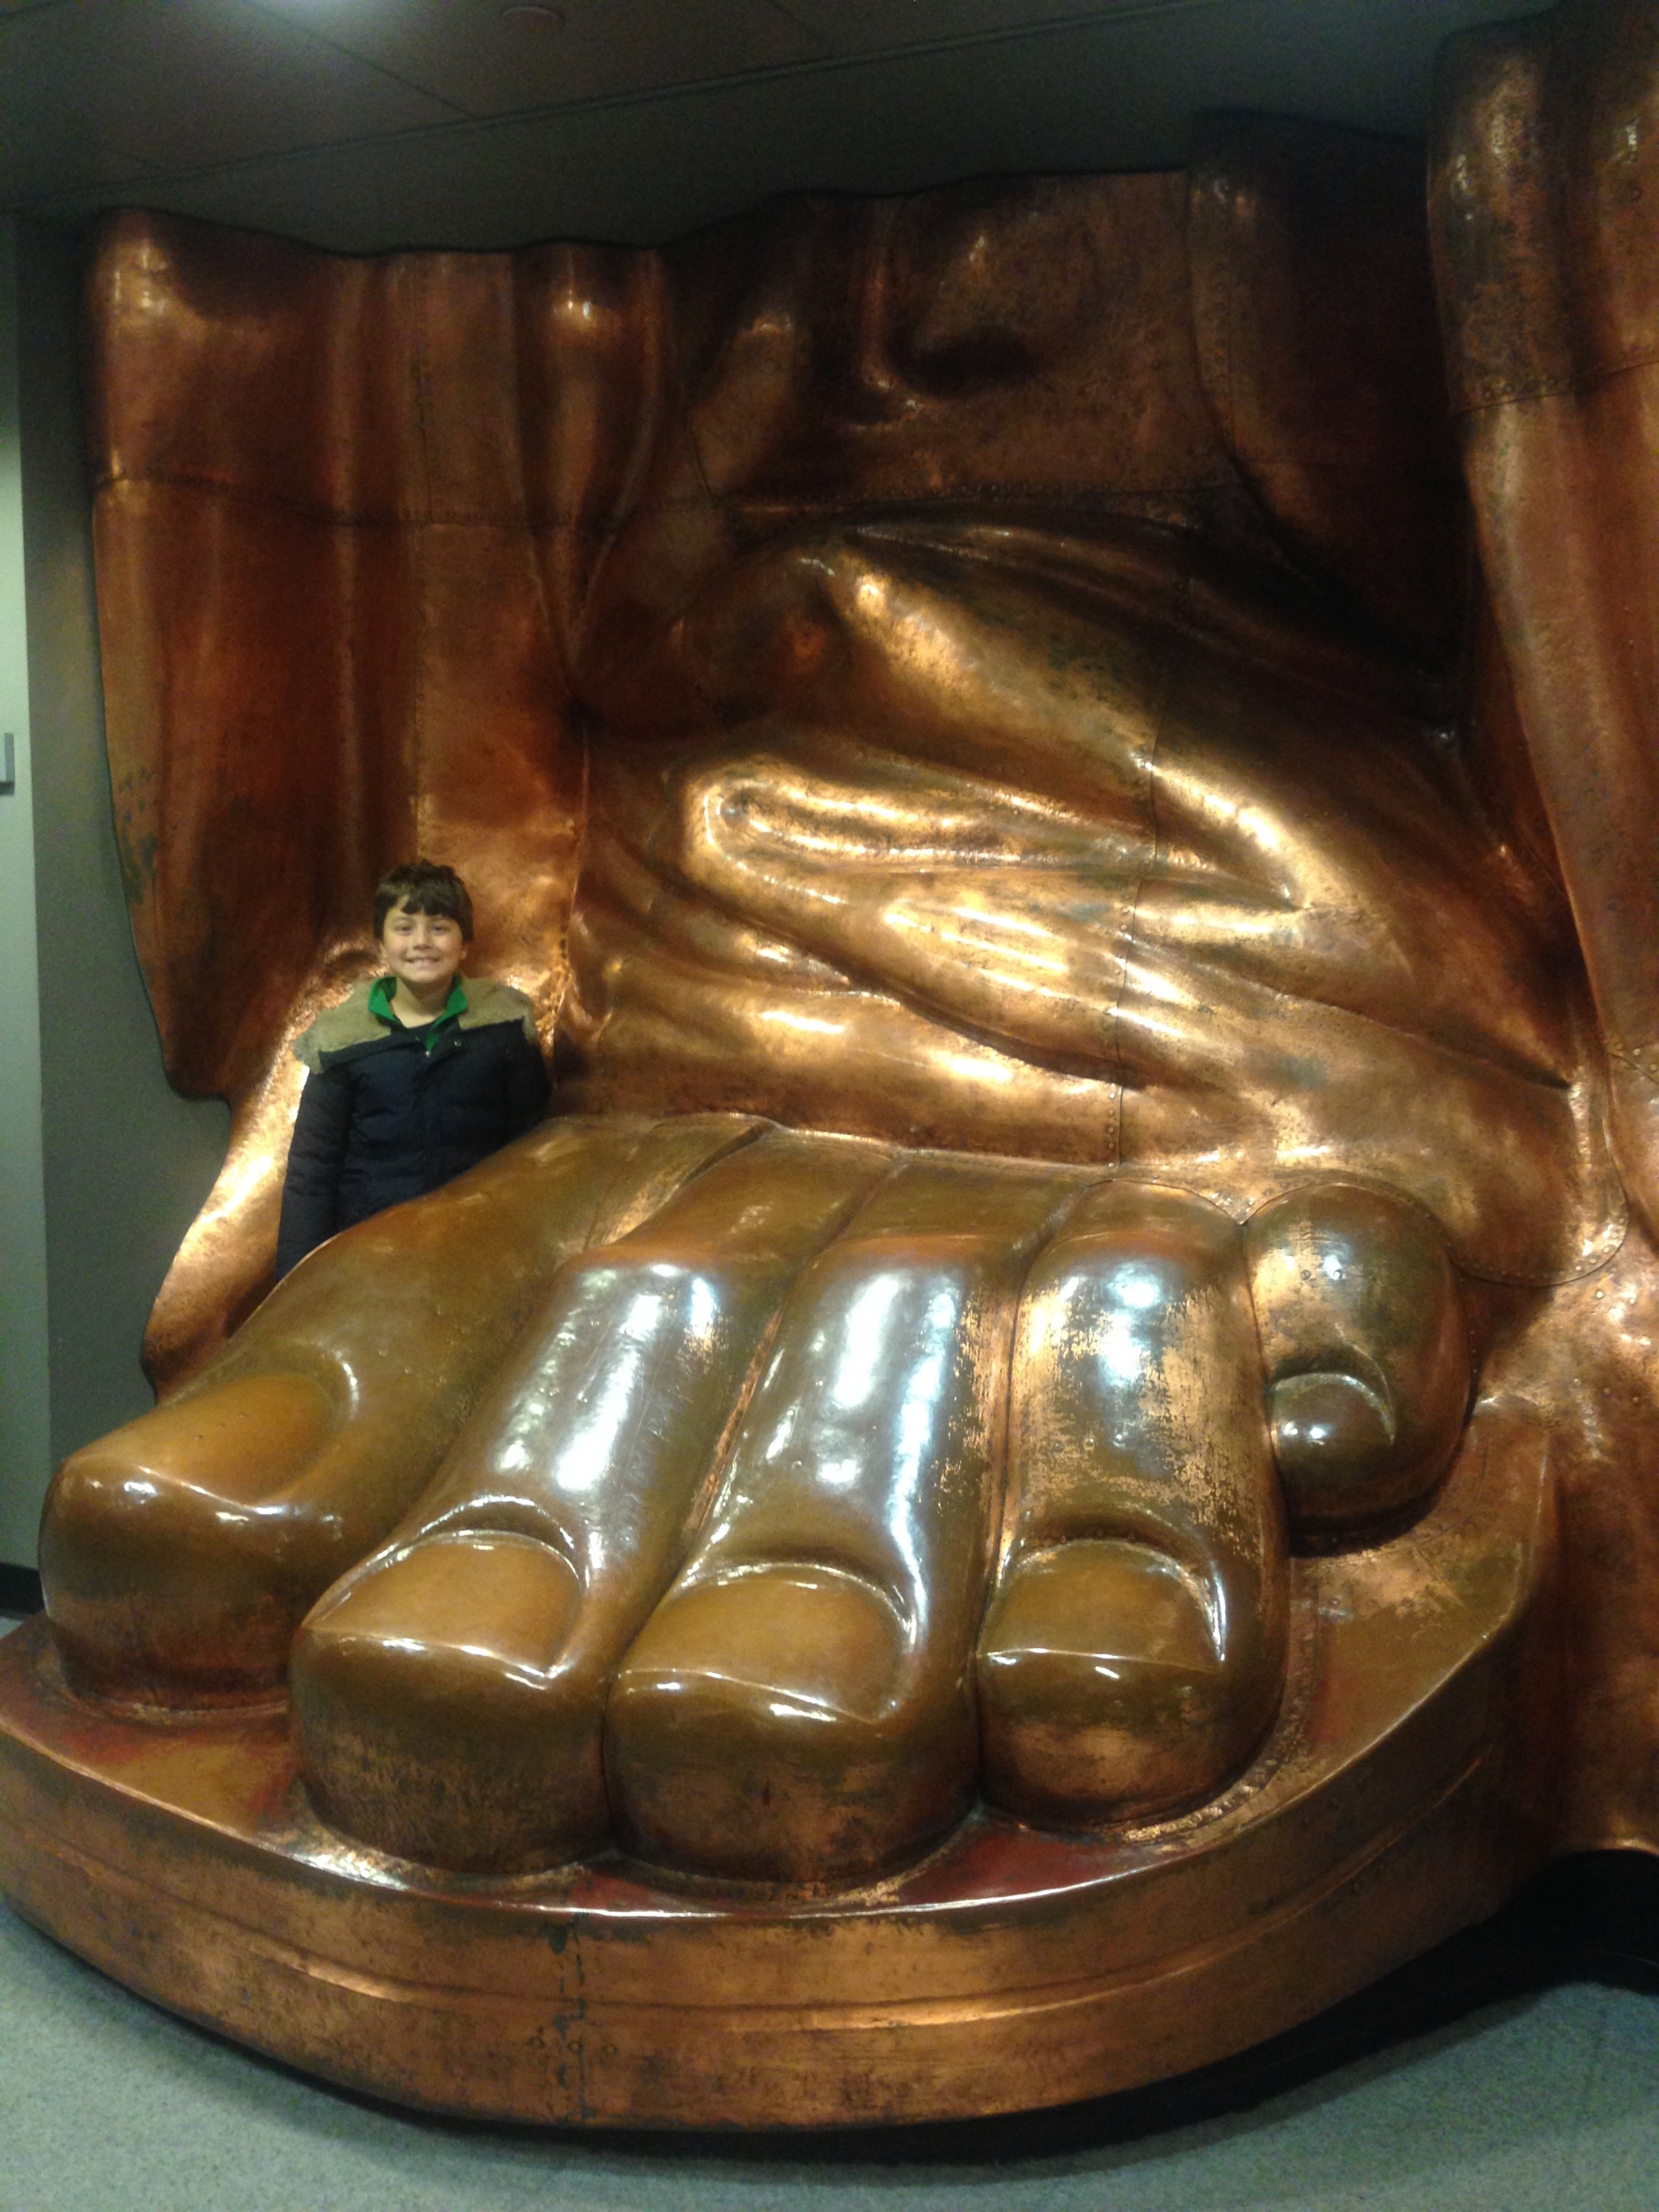 Boy posing next to museum sculpture of Statue of Liberty's foot, New York